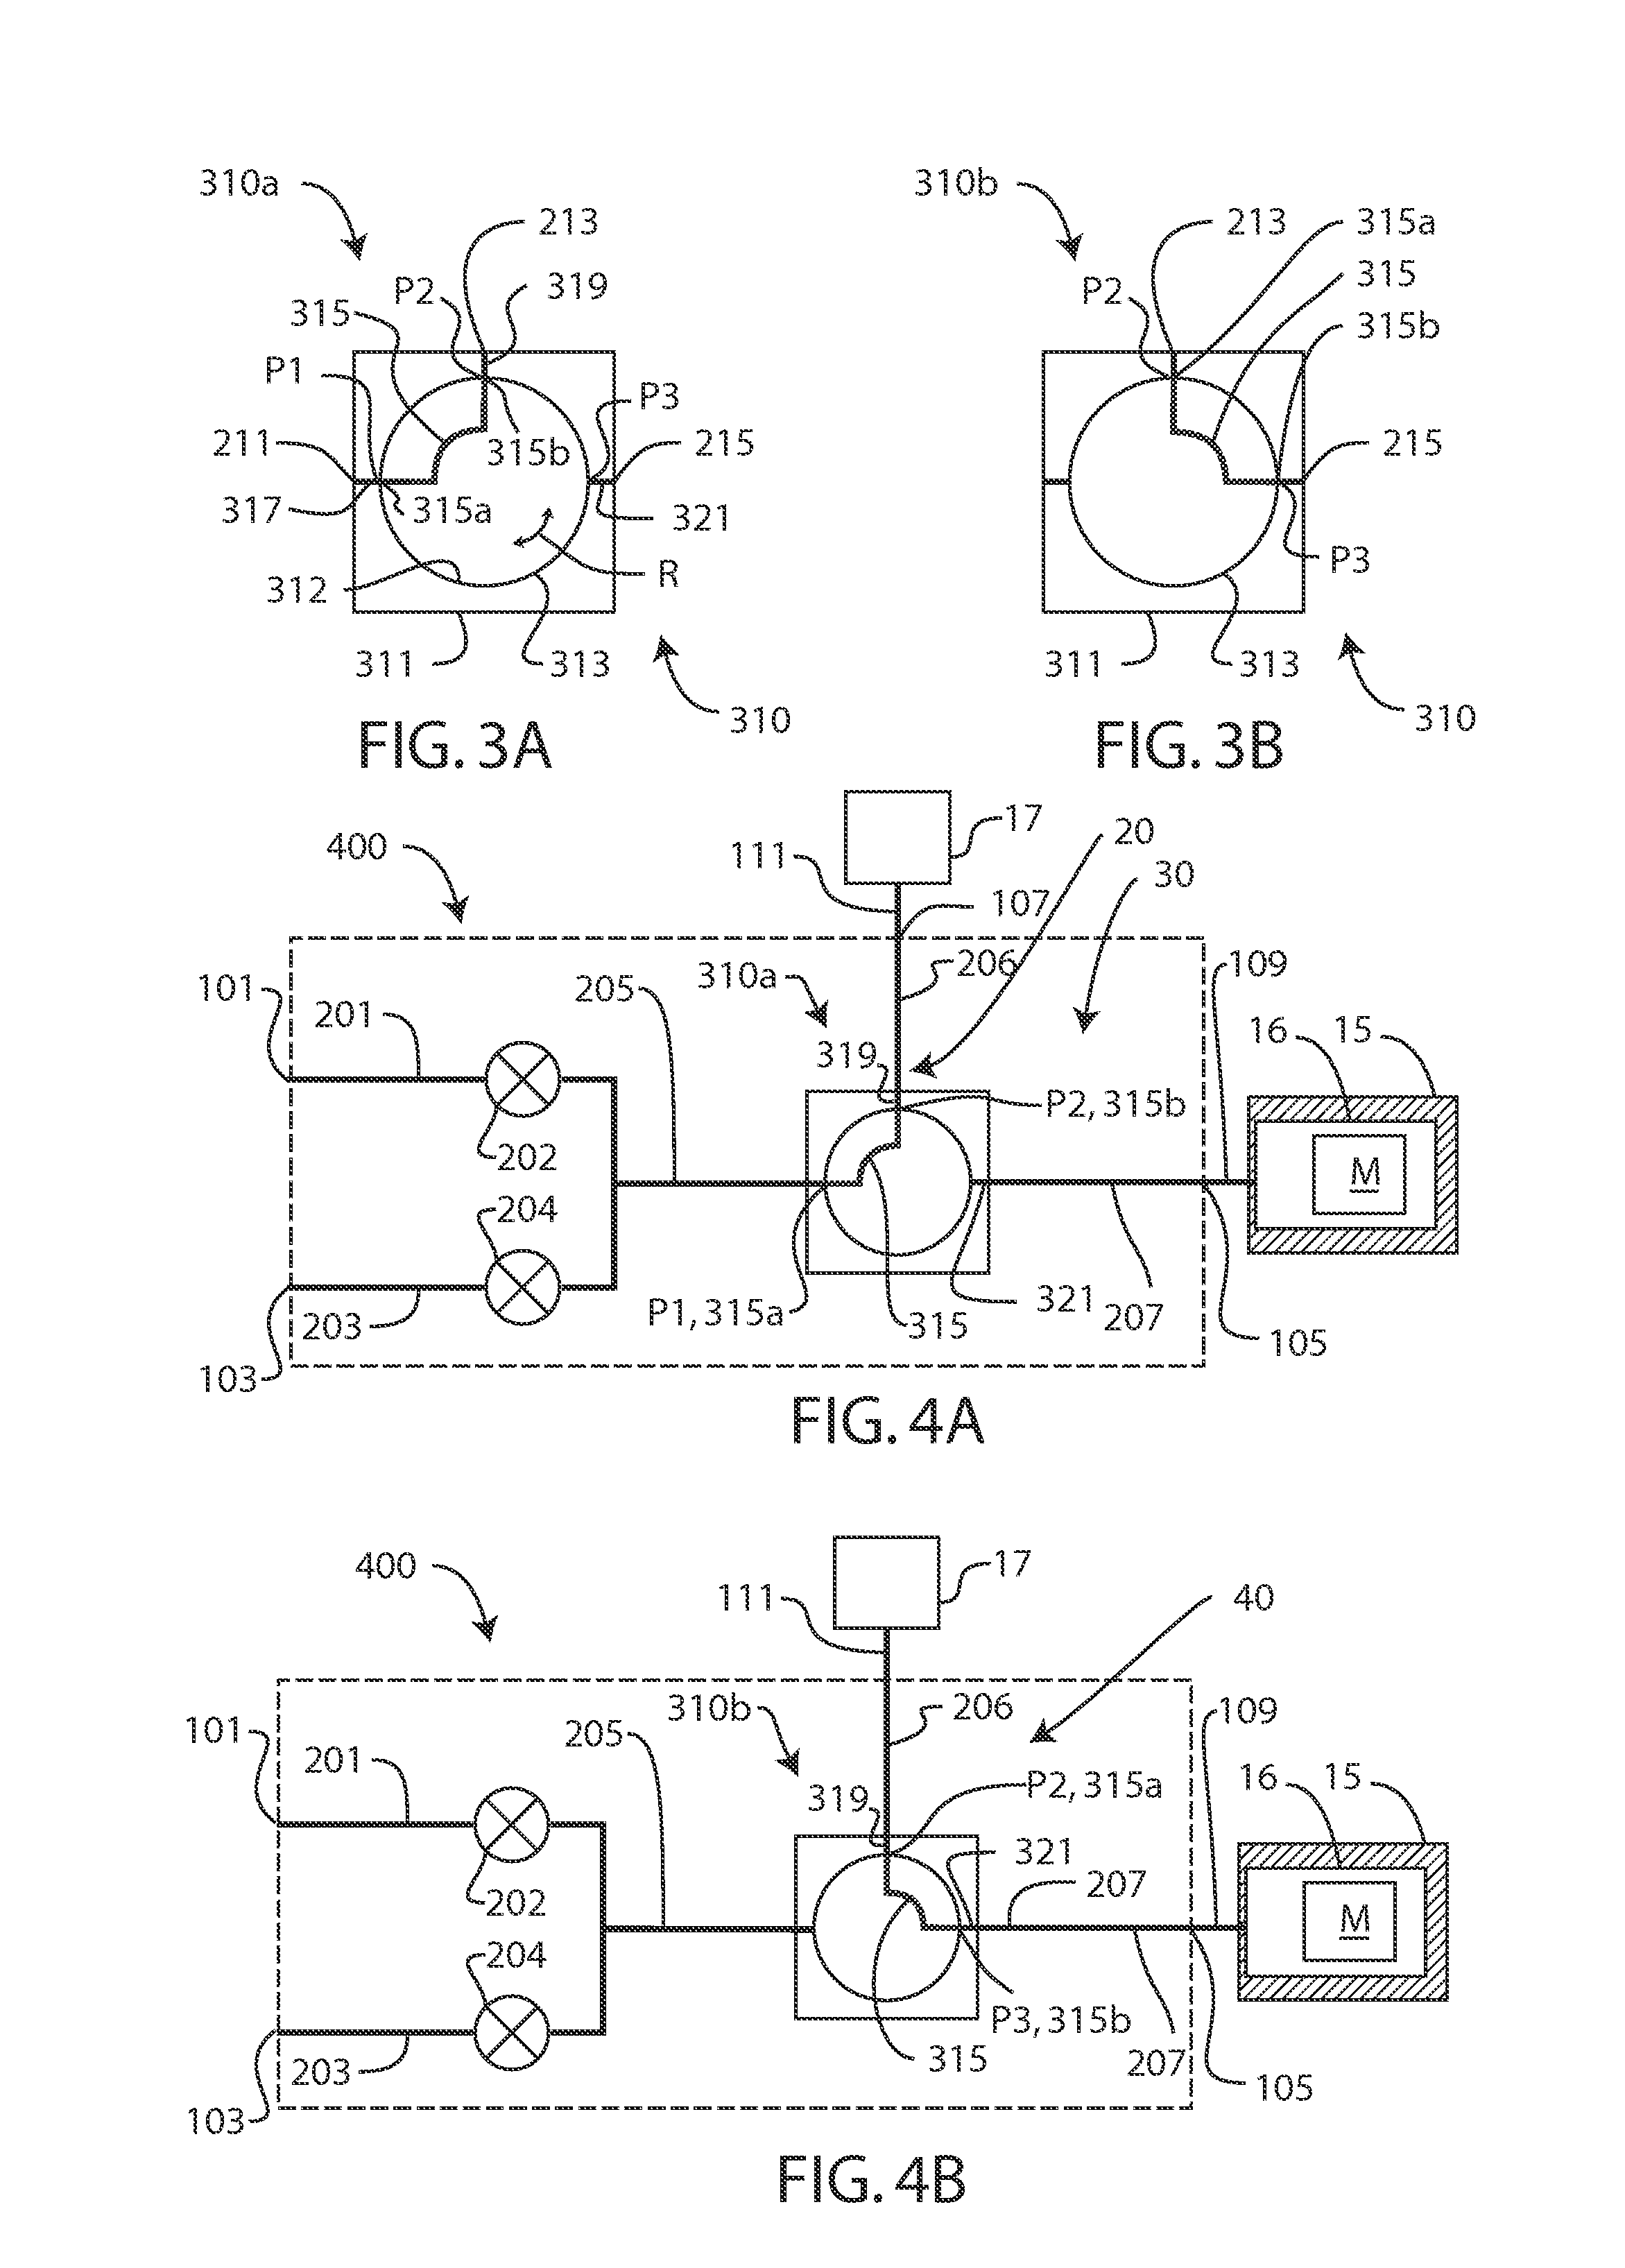 Method and apparatus for handling small quantities of fluids